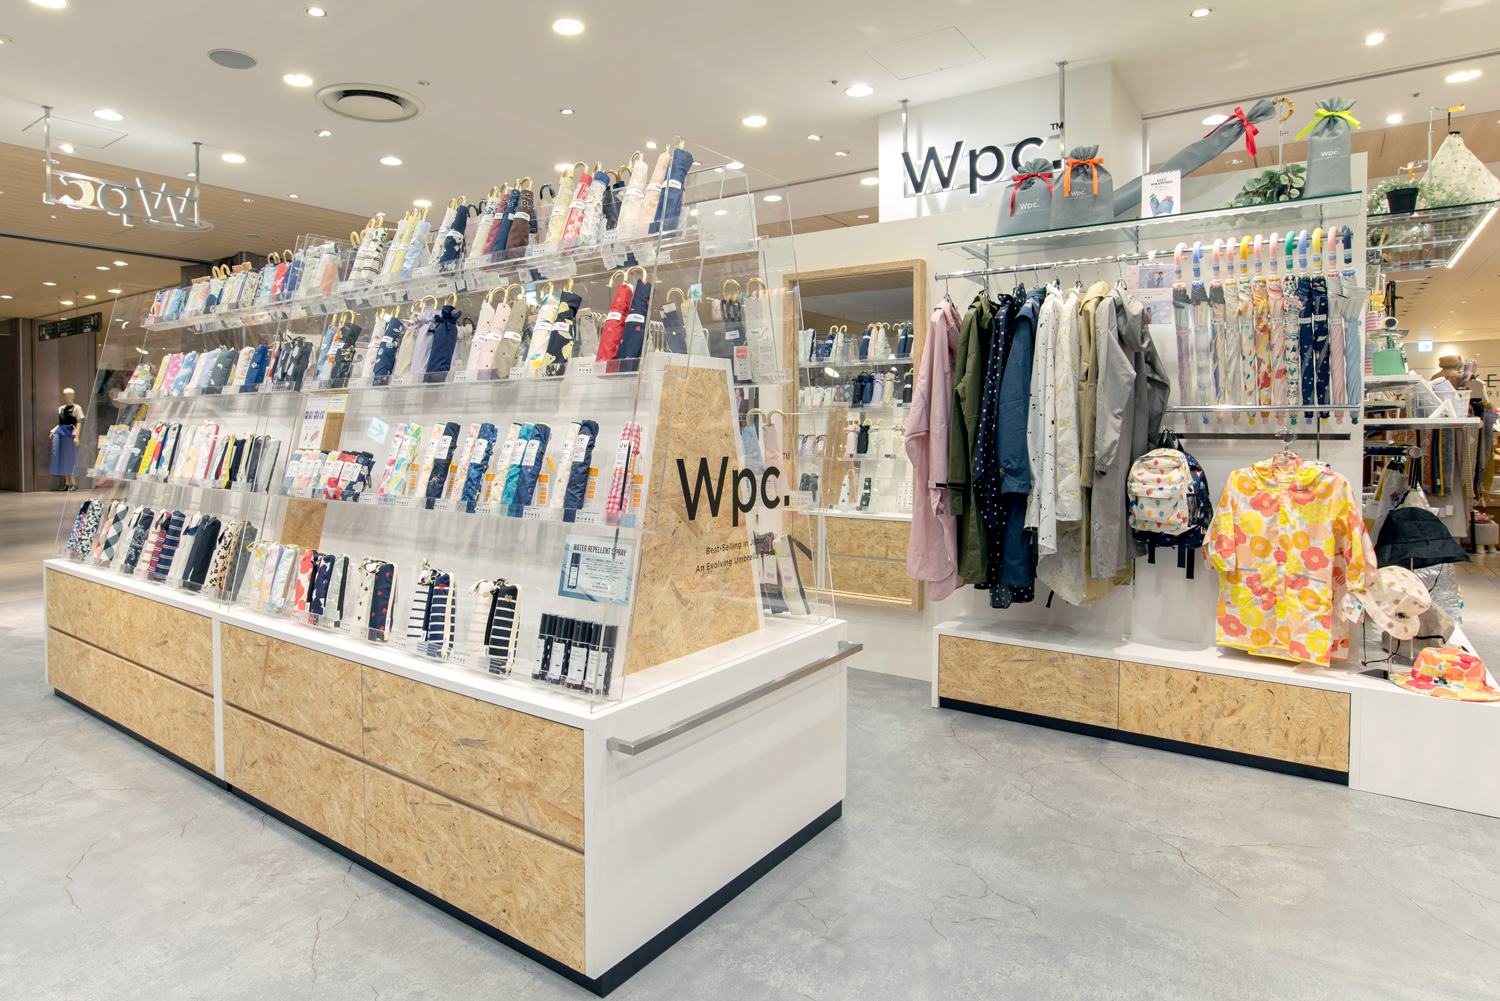 Wpc.ルクア1100店内